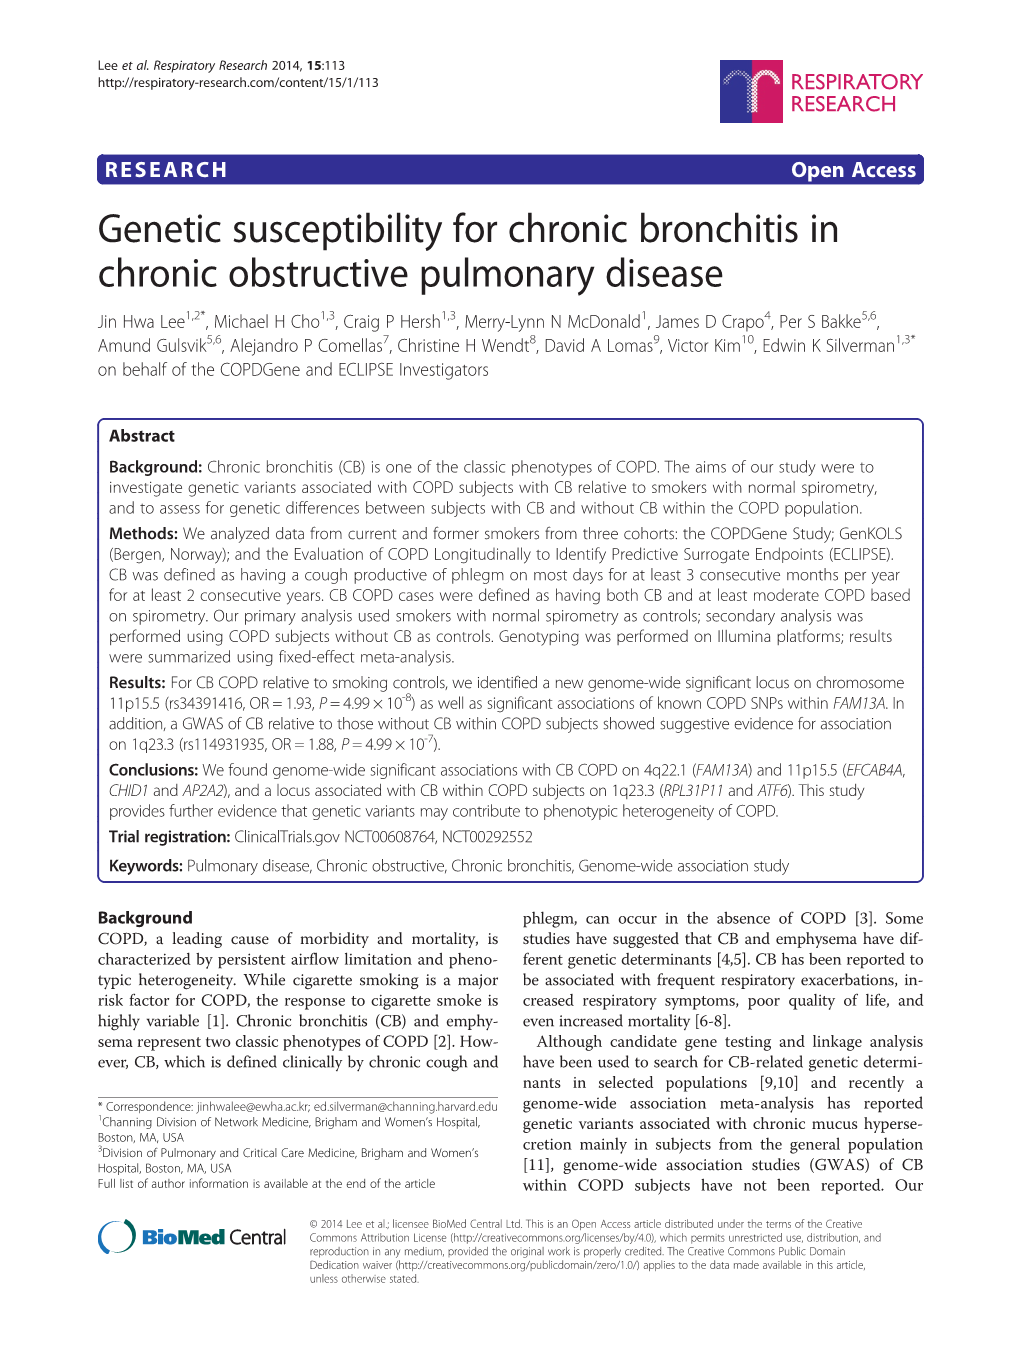 Genetic Susceptibility for Chronic Bronchitis in Chronic Obstructive